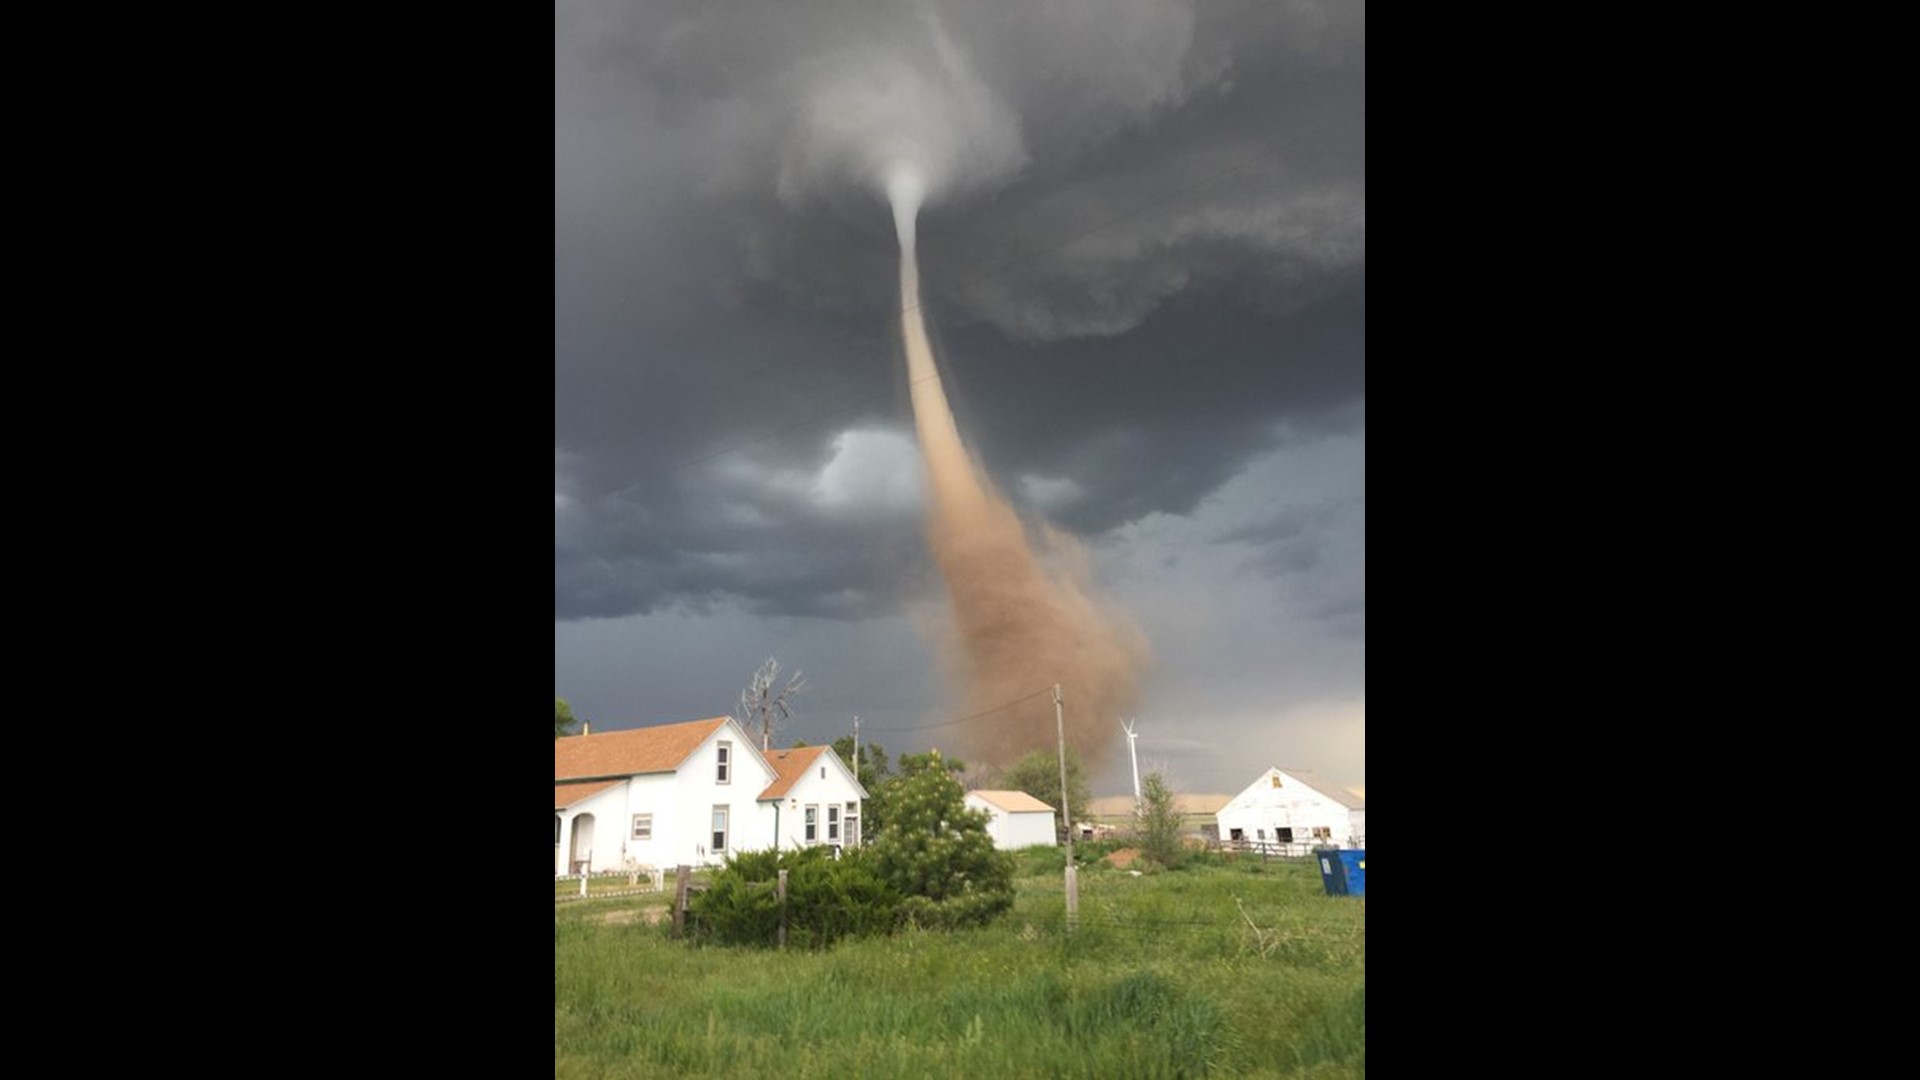 More than 400 tornadoes hit Colorado in the past decade